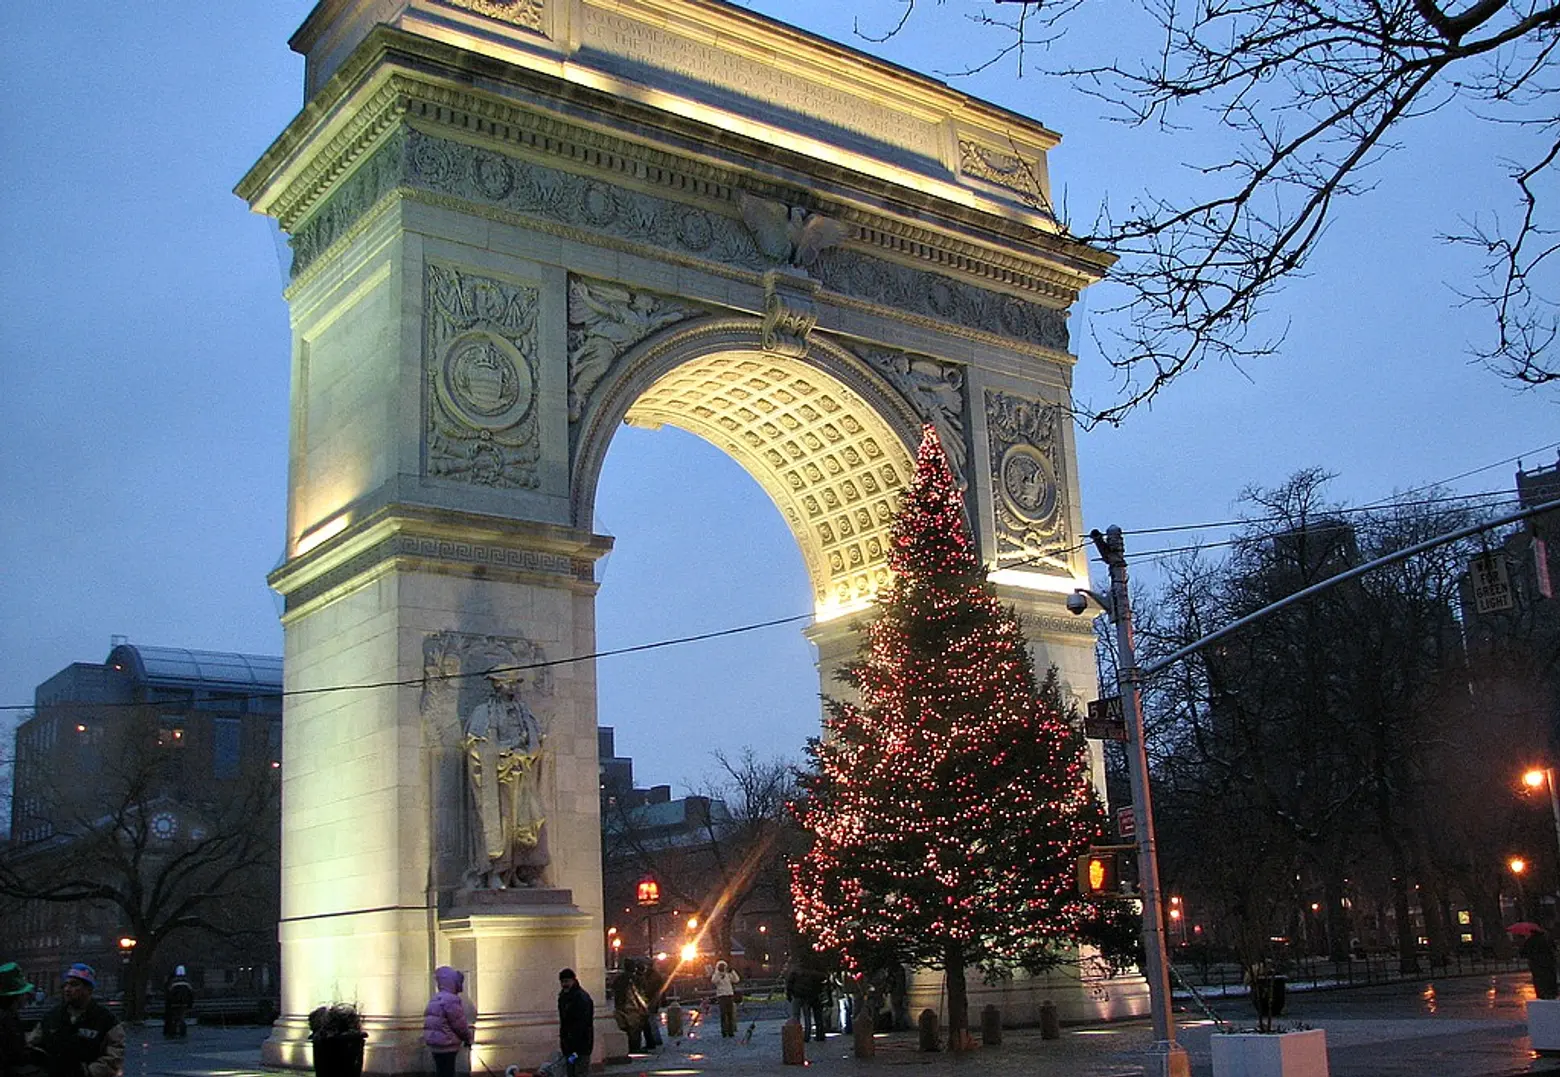 The top 9 Christmas Trees for NYC Proposal during holiday 2019.